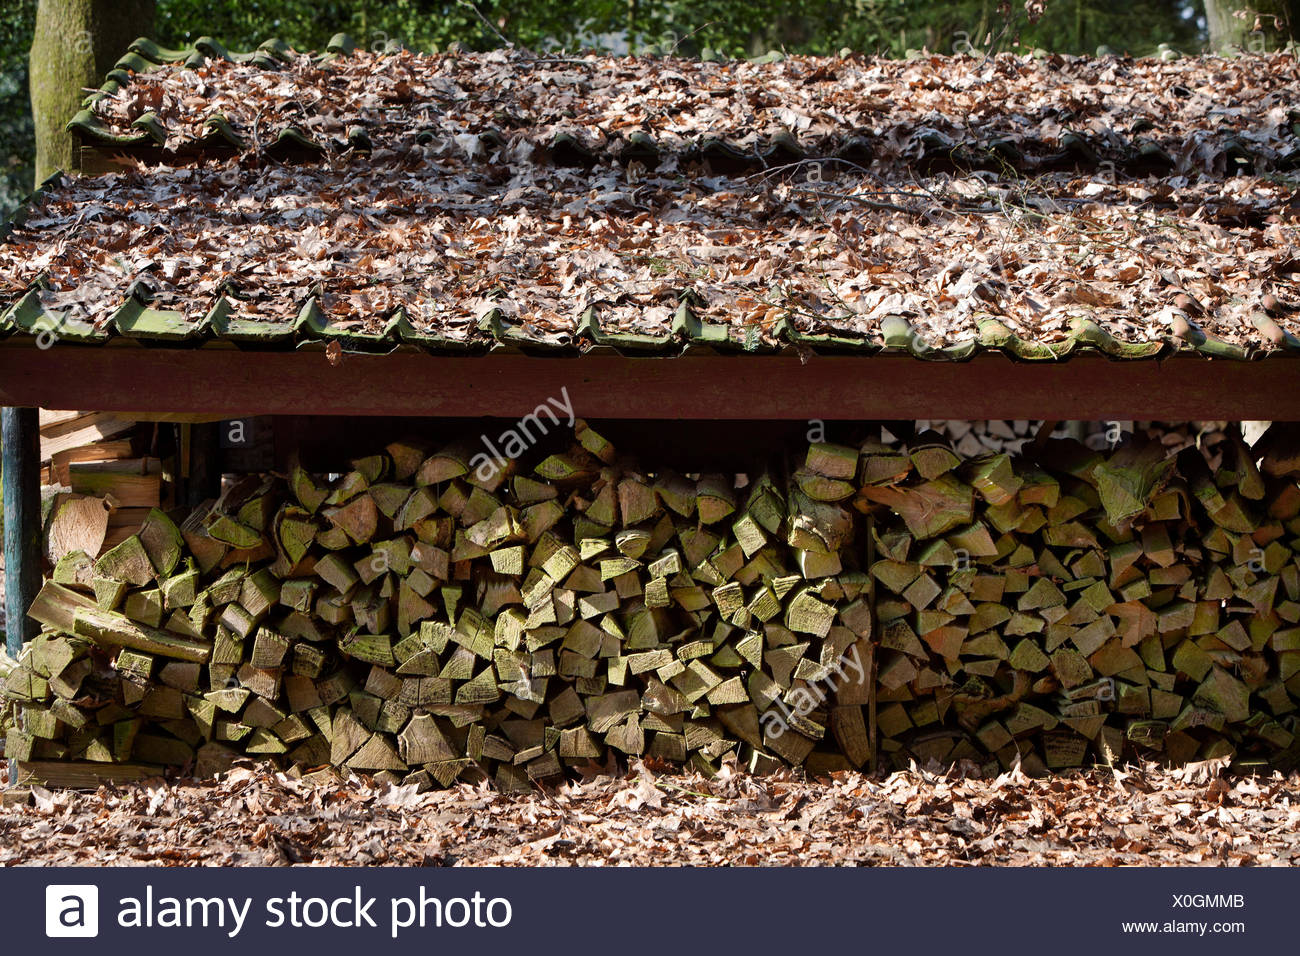 Pile Of Fire Wood Outdoor Stock Photos Pile Of Fire Wood Outdoor